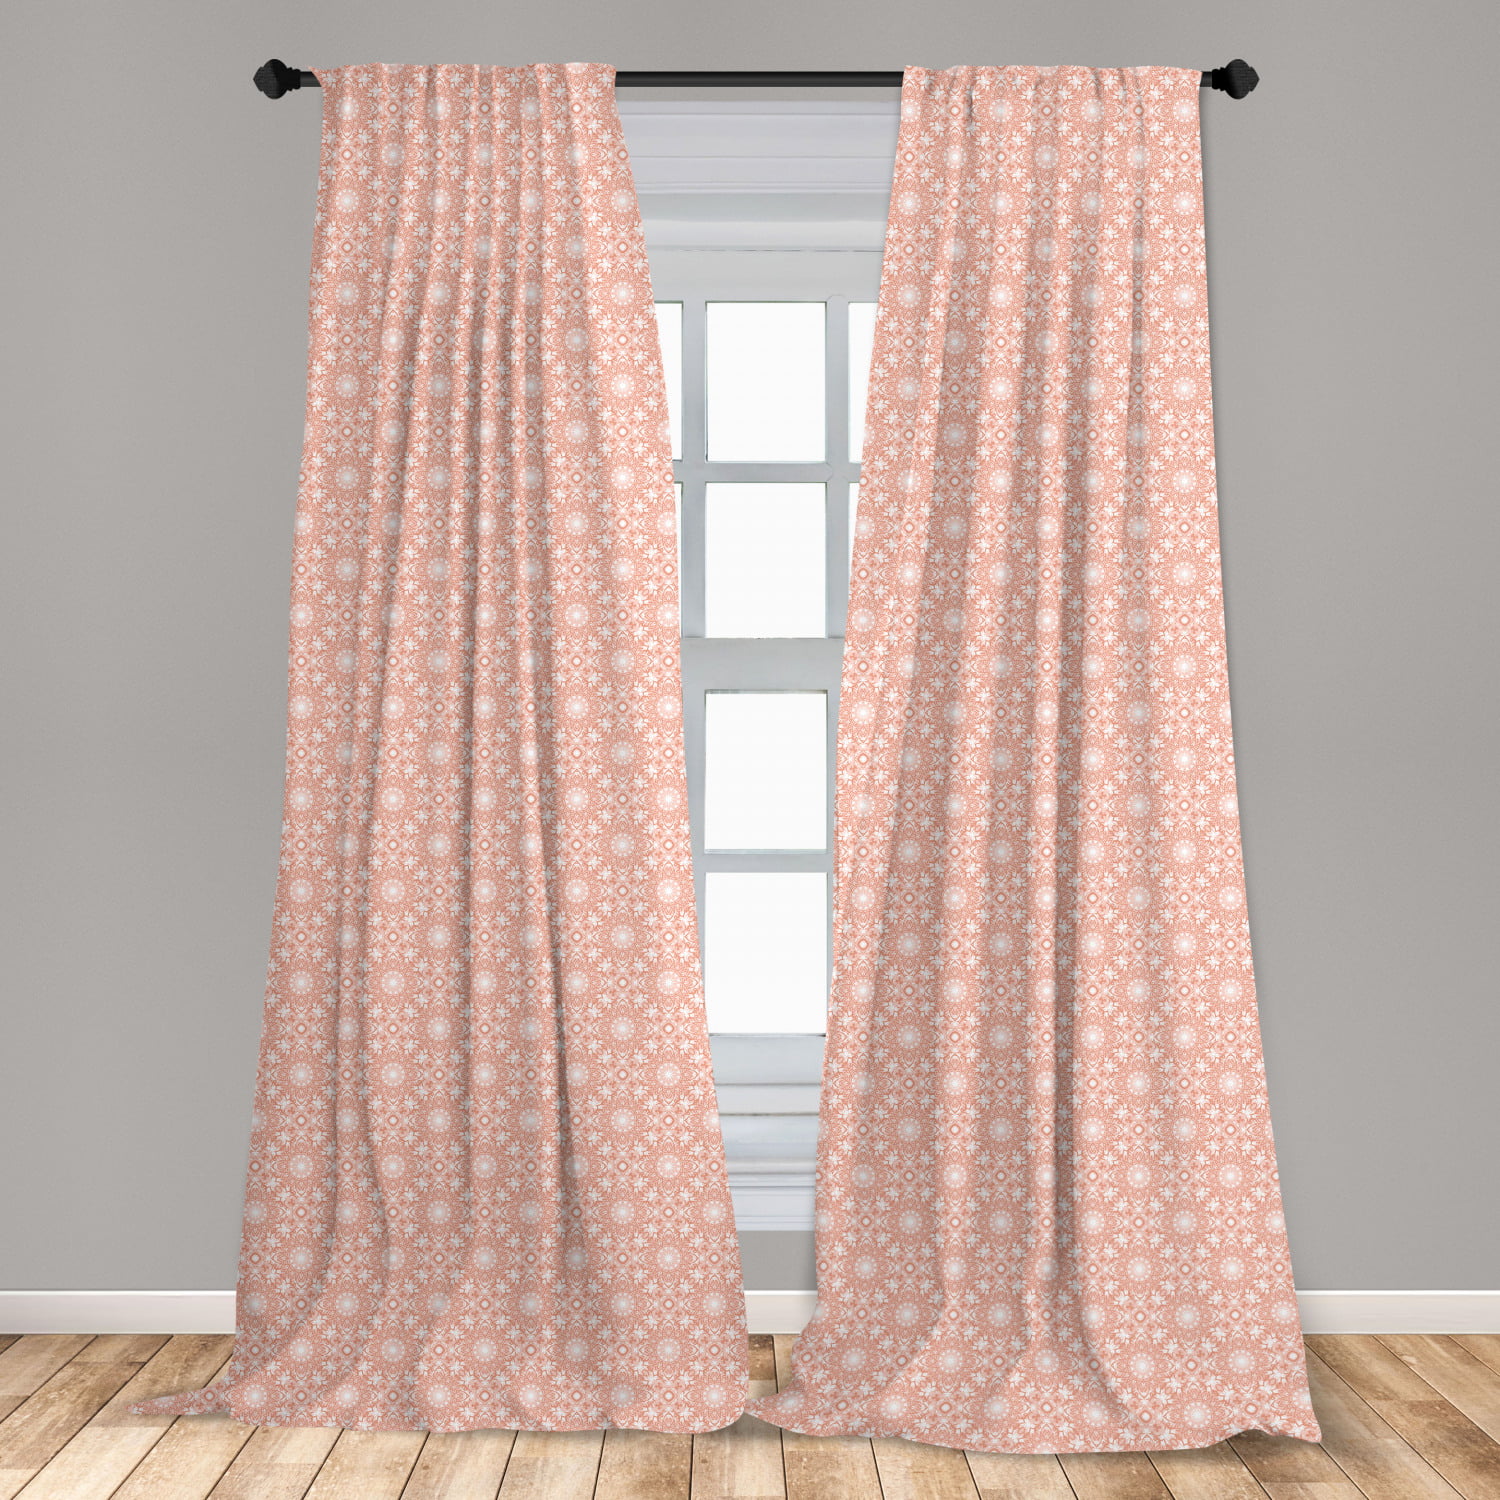 Coral Microfiber Curtains 2 Panel Set Living Room Bedroom in 3 Sizes 